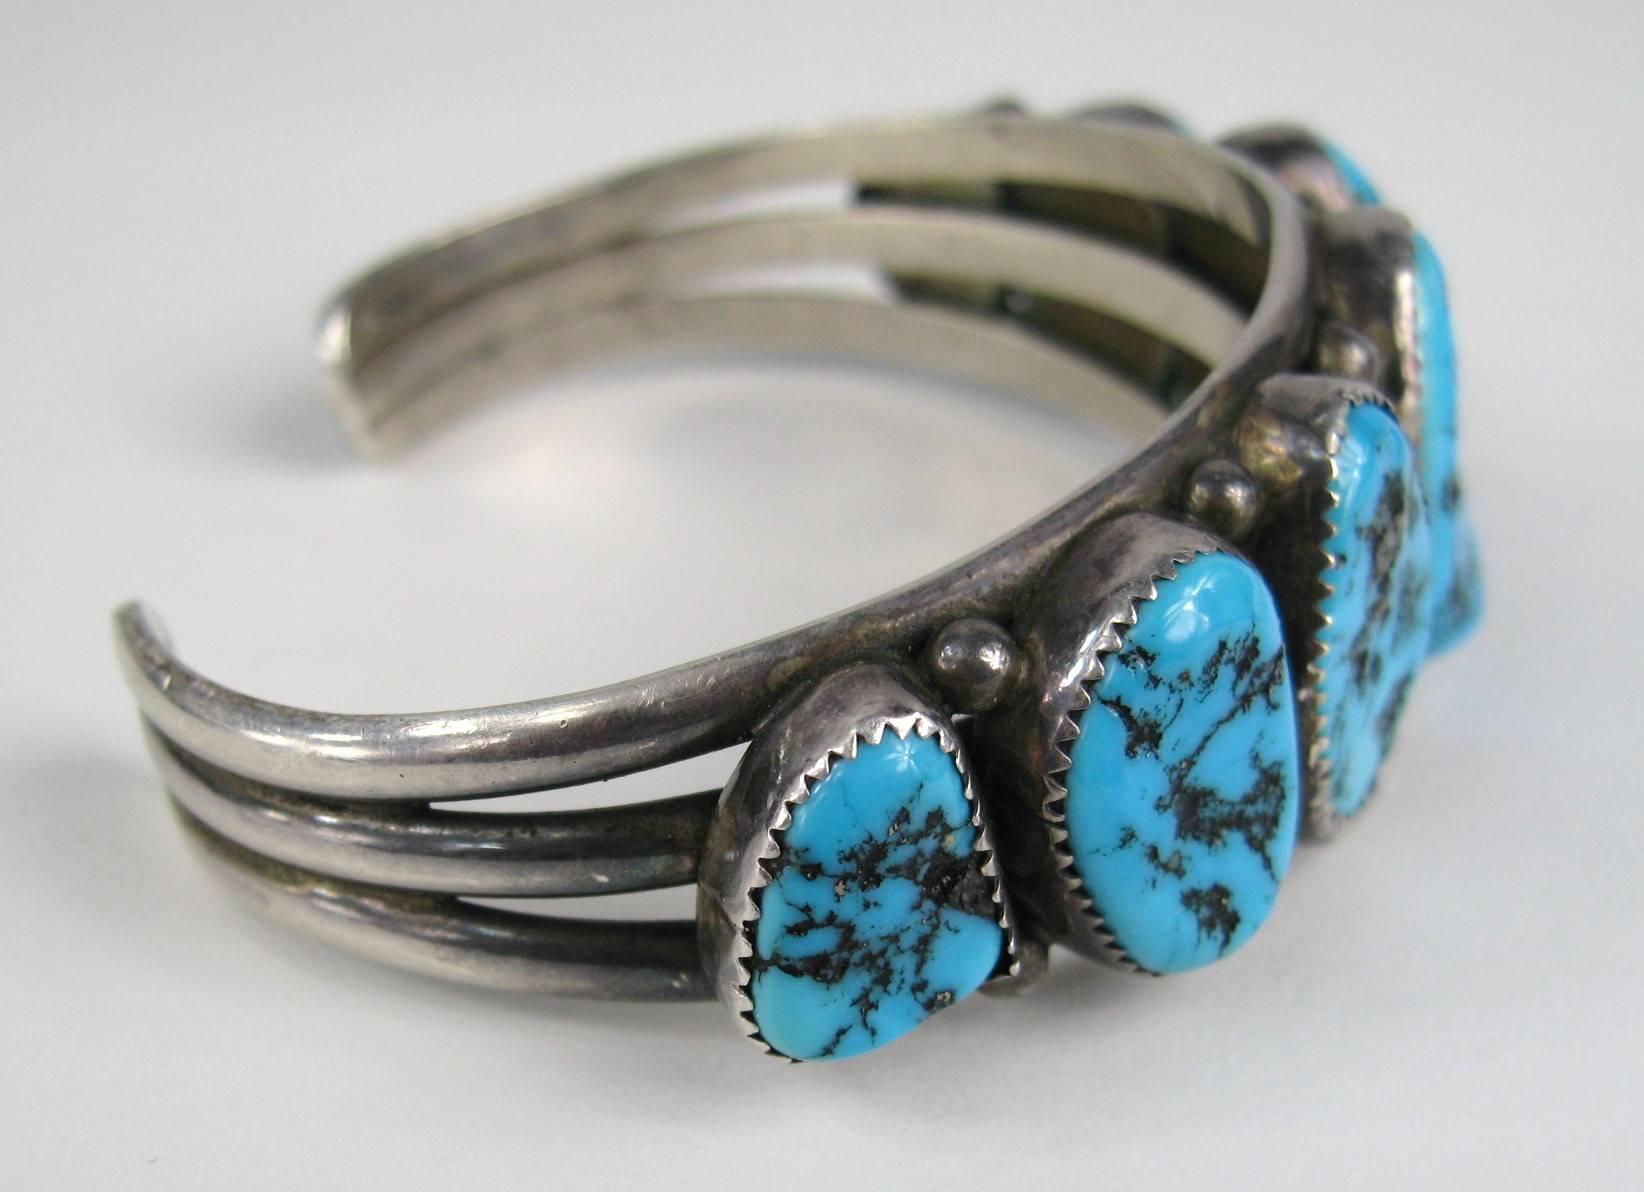 Hand crafted Sleeping Beauty Navajo Sterling silver bracelet. 3 Rings makes up the bracelet with 7 bezel set Turquoise stones set in a graduated fashion. This can be worn by both a man or woman Measuring 1 inches at it widest 1.45 in. opening Will